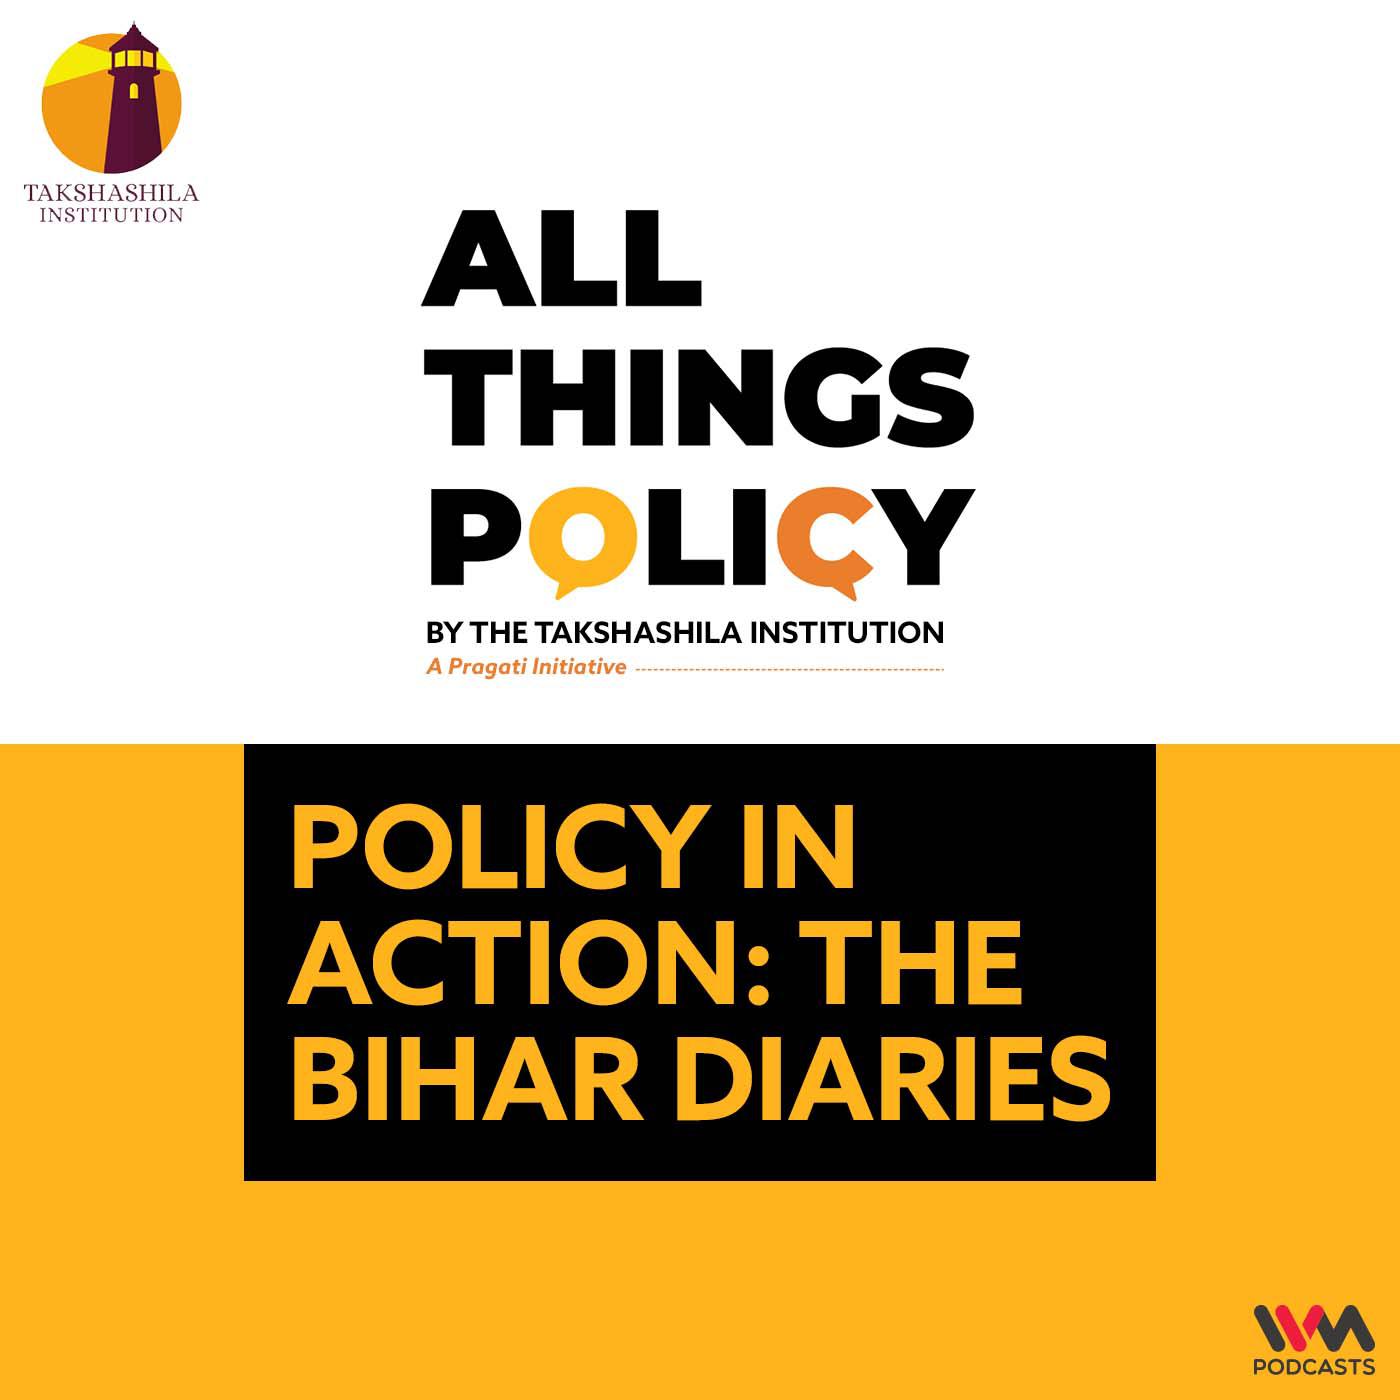 Policy in Action: The Bihar Diaries